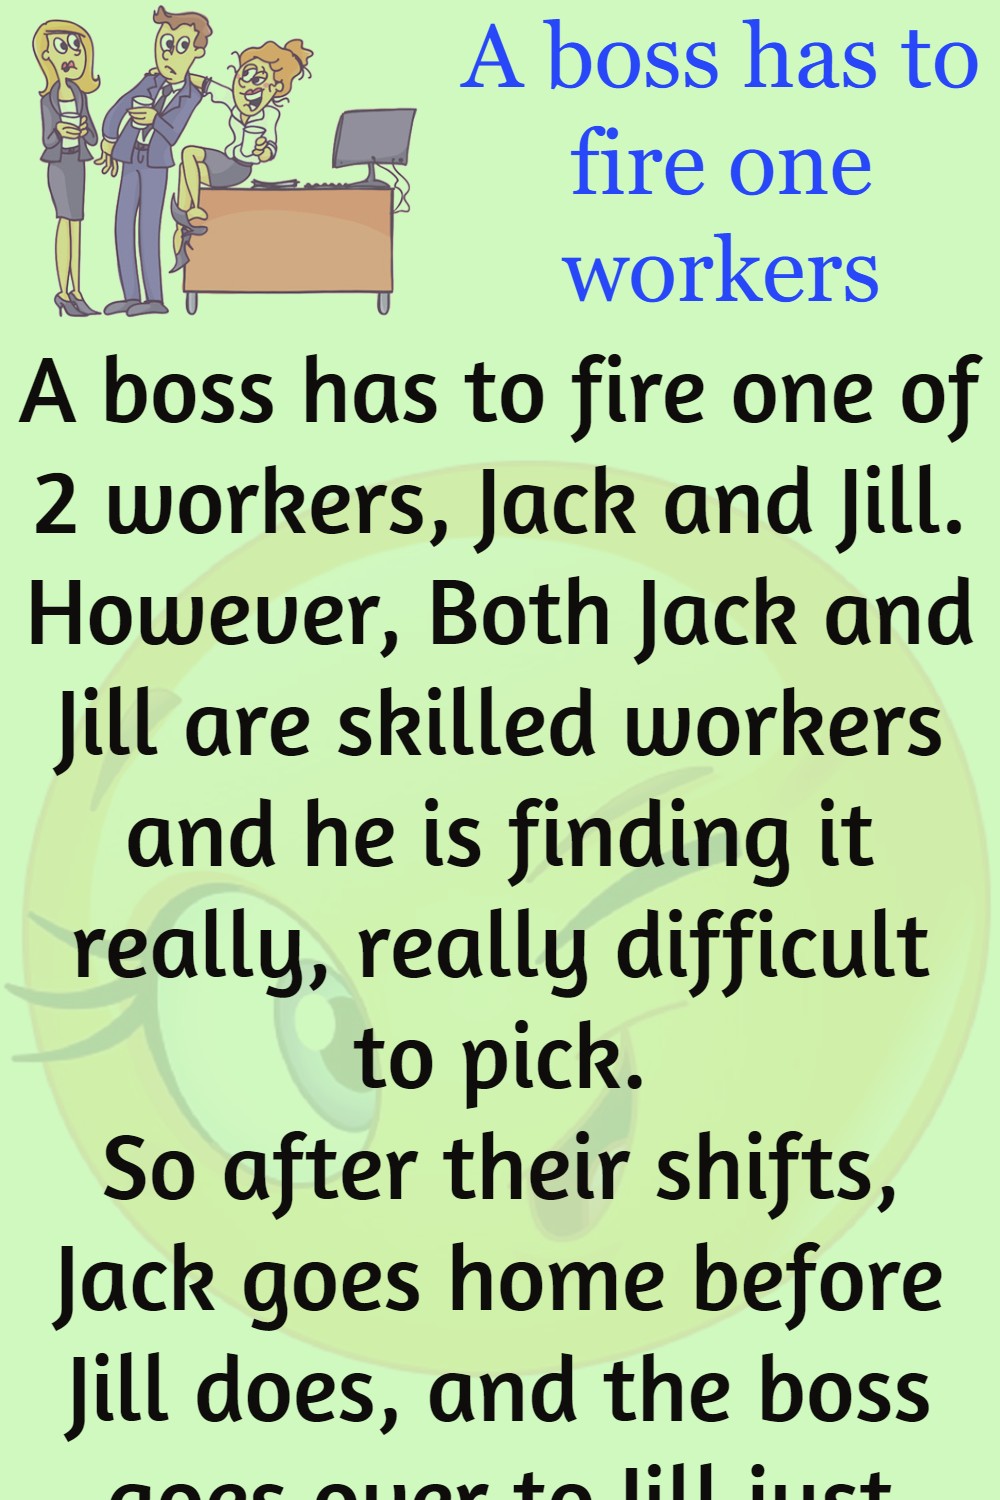 A boss has to fire one workers